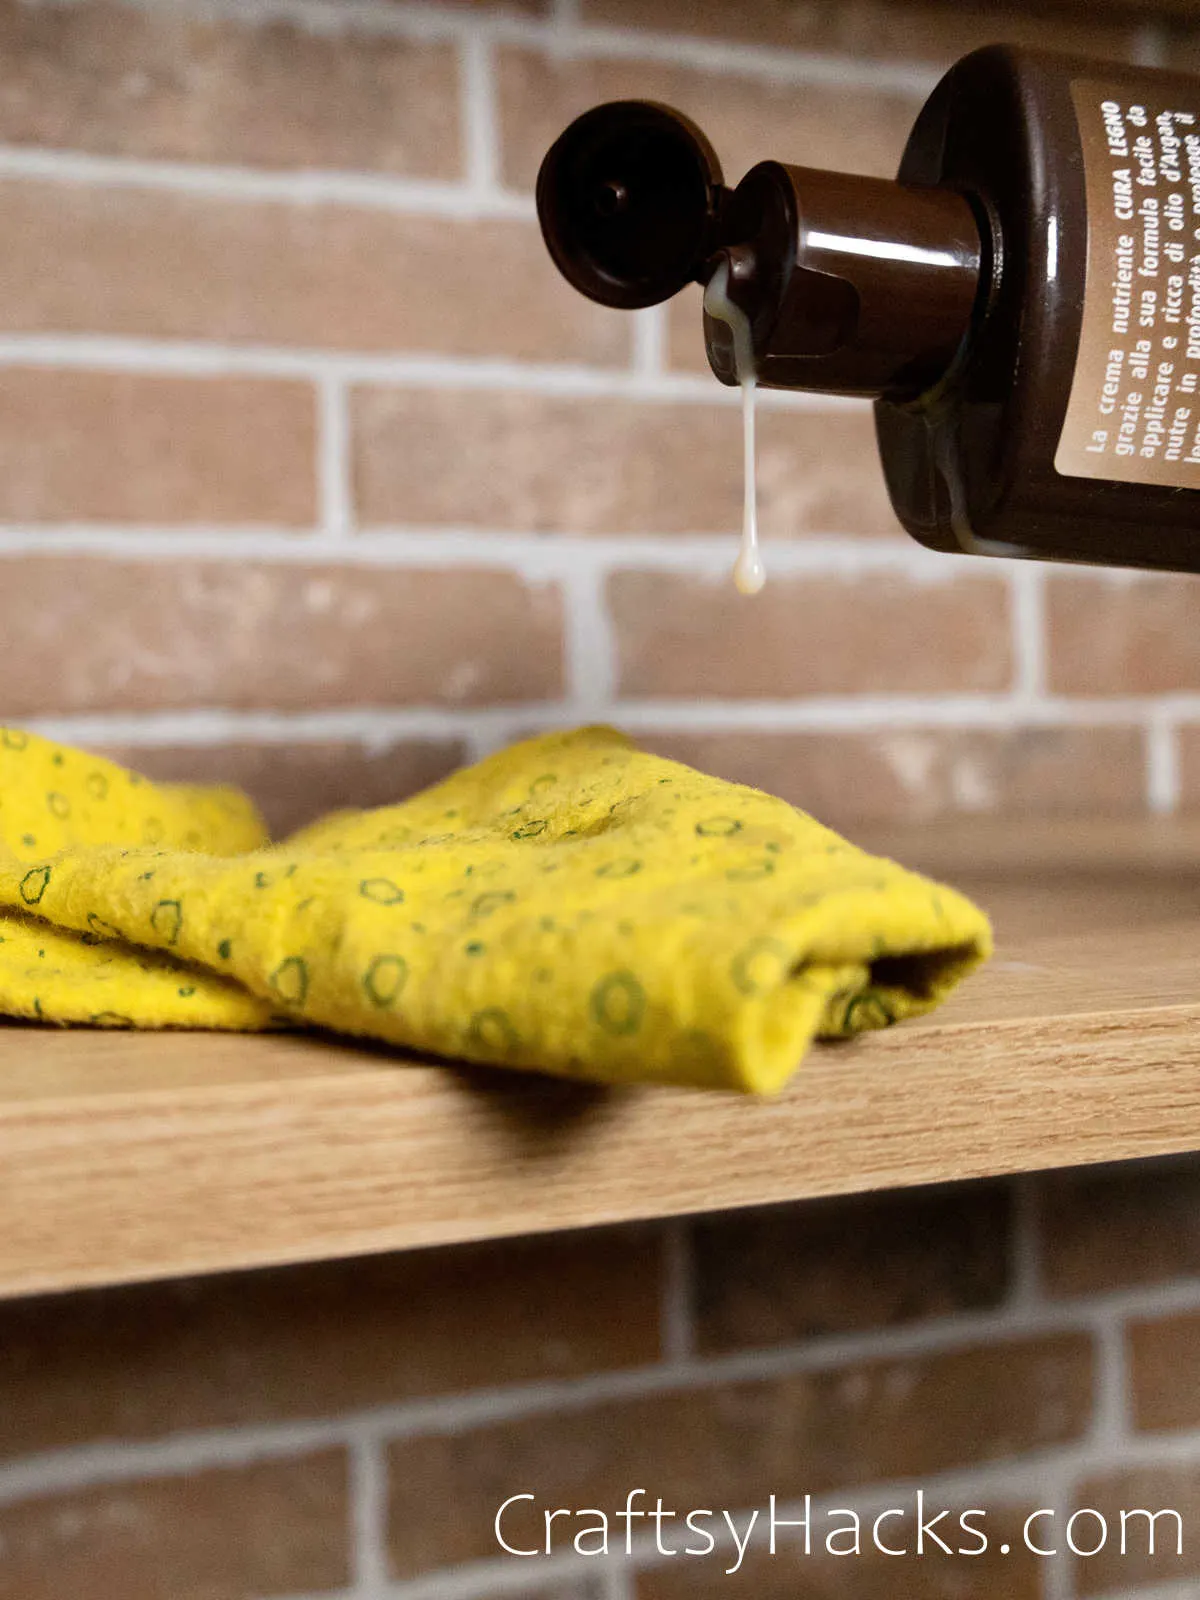 shine wooden surfaces with murphy's oil soap